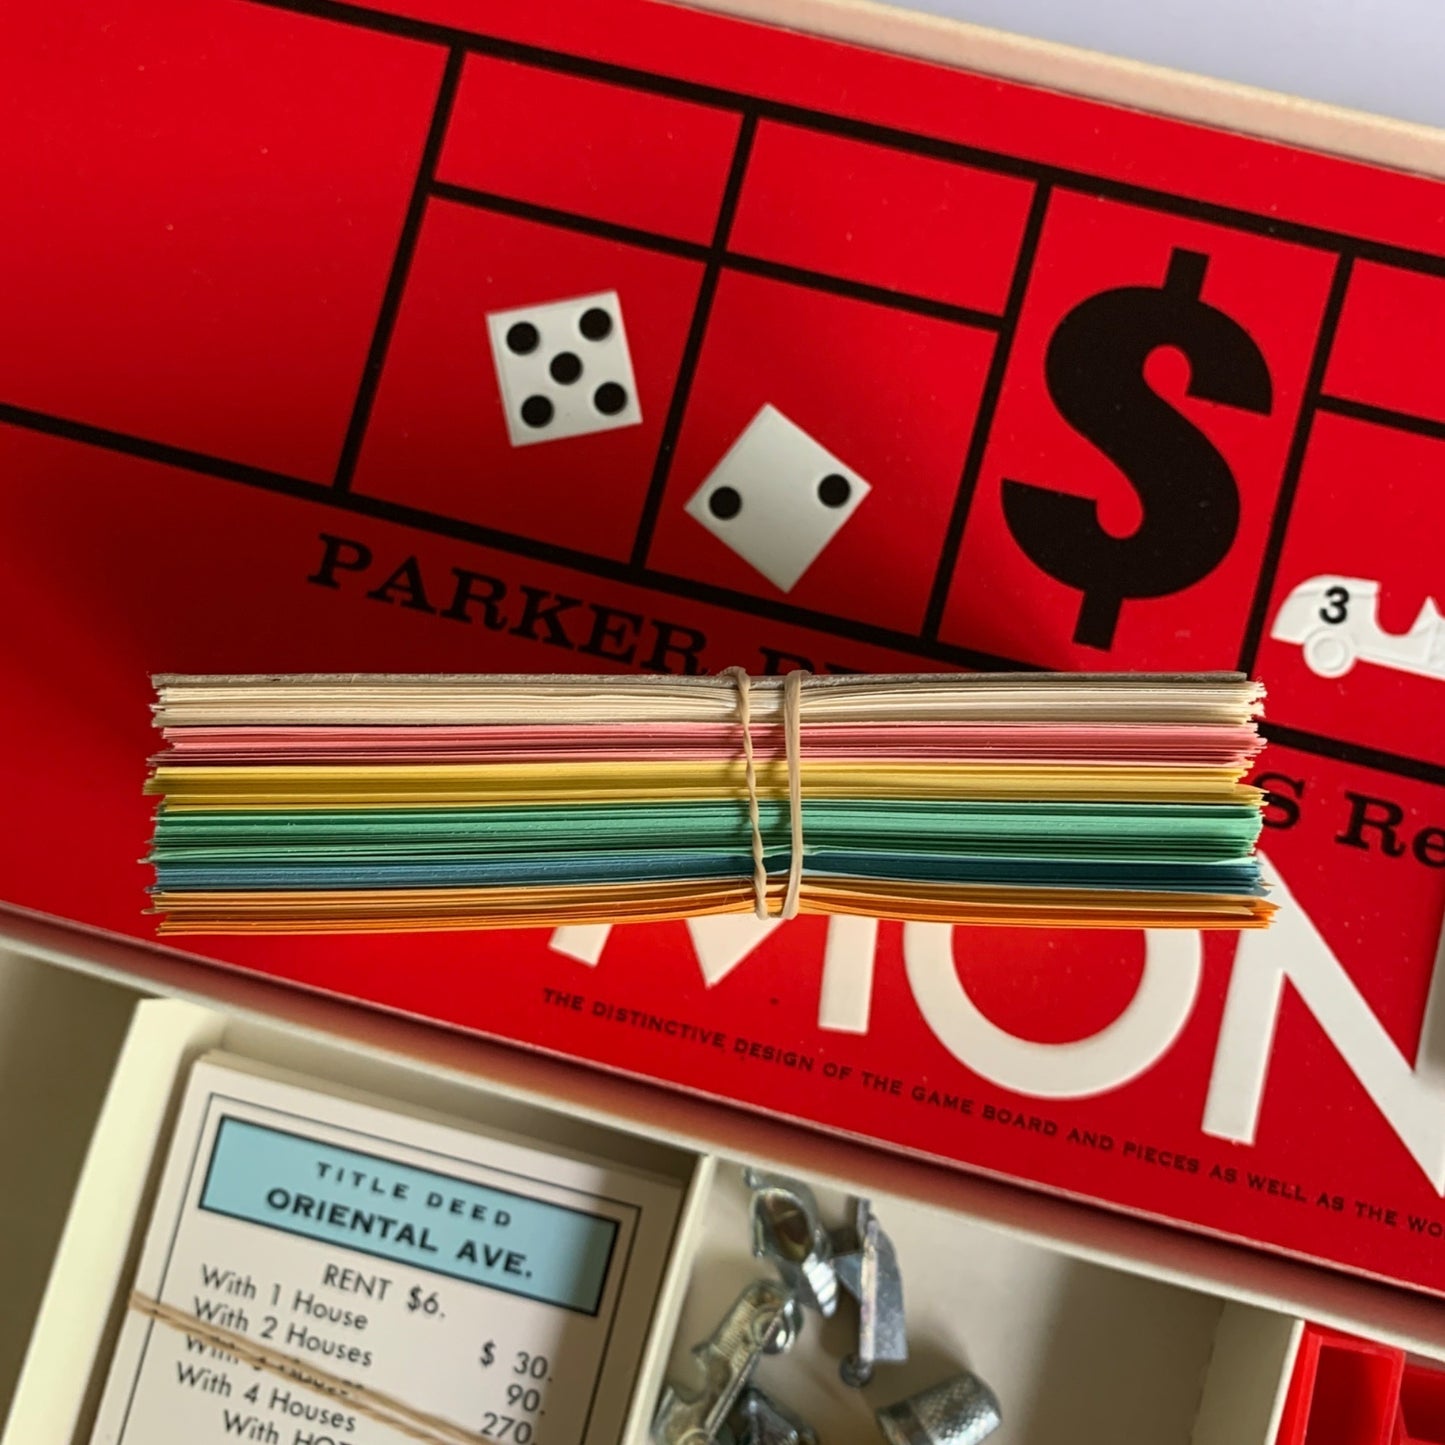 Parker Brothers 1961 Monopoly Board Game Complete Unused